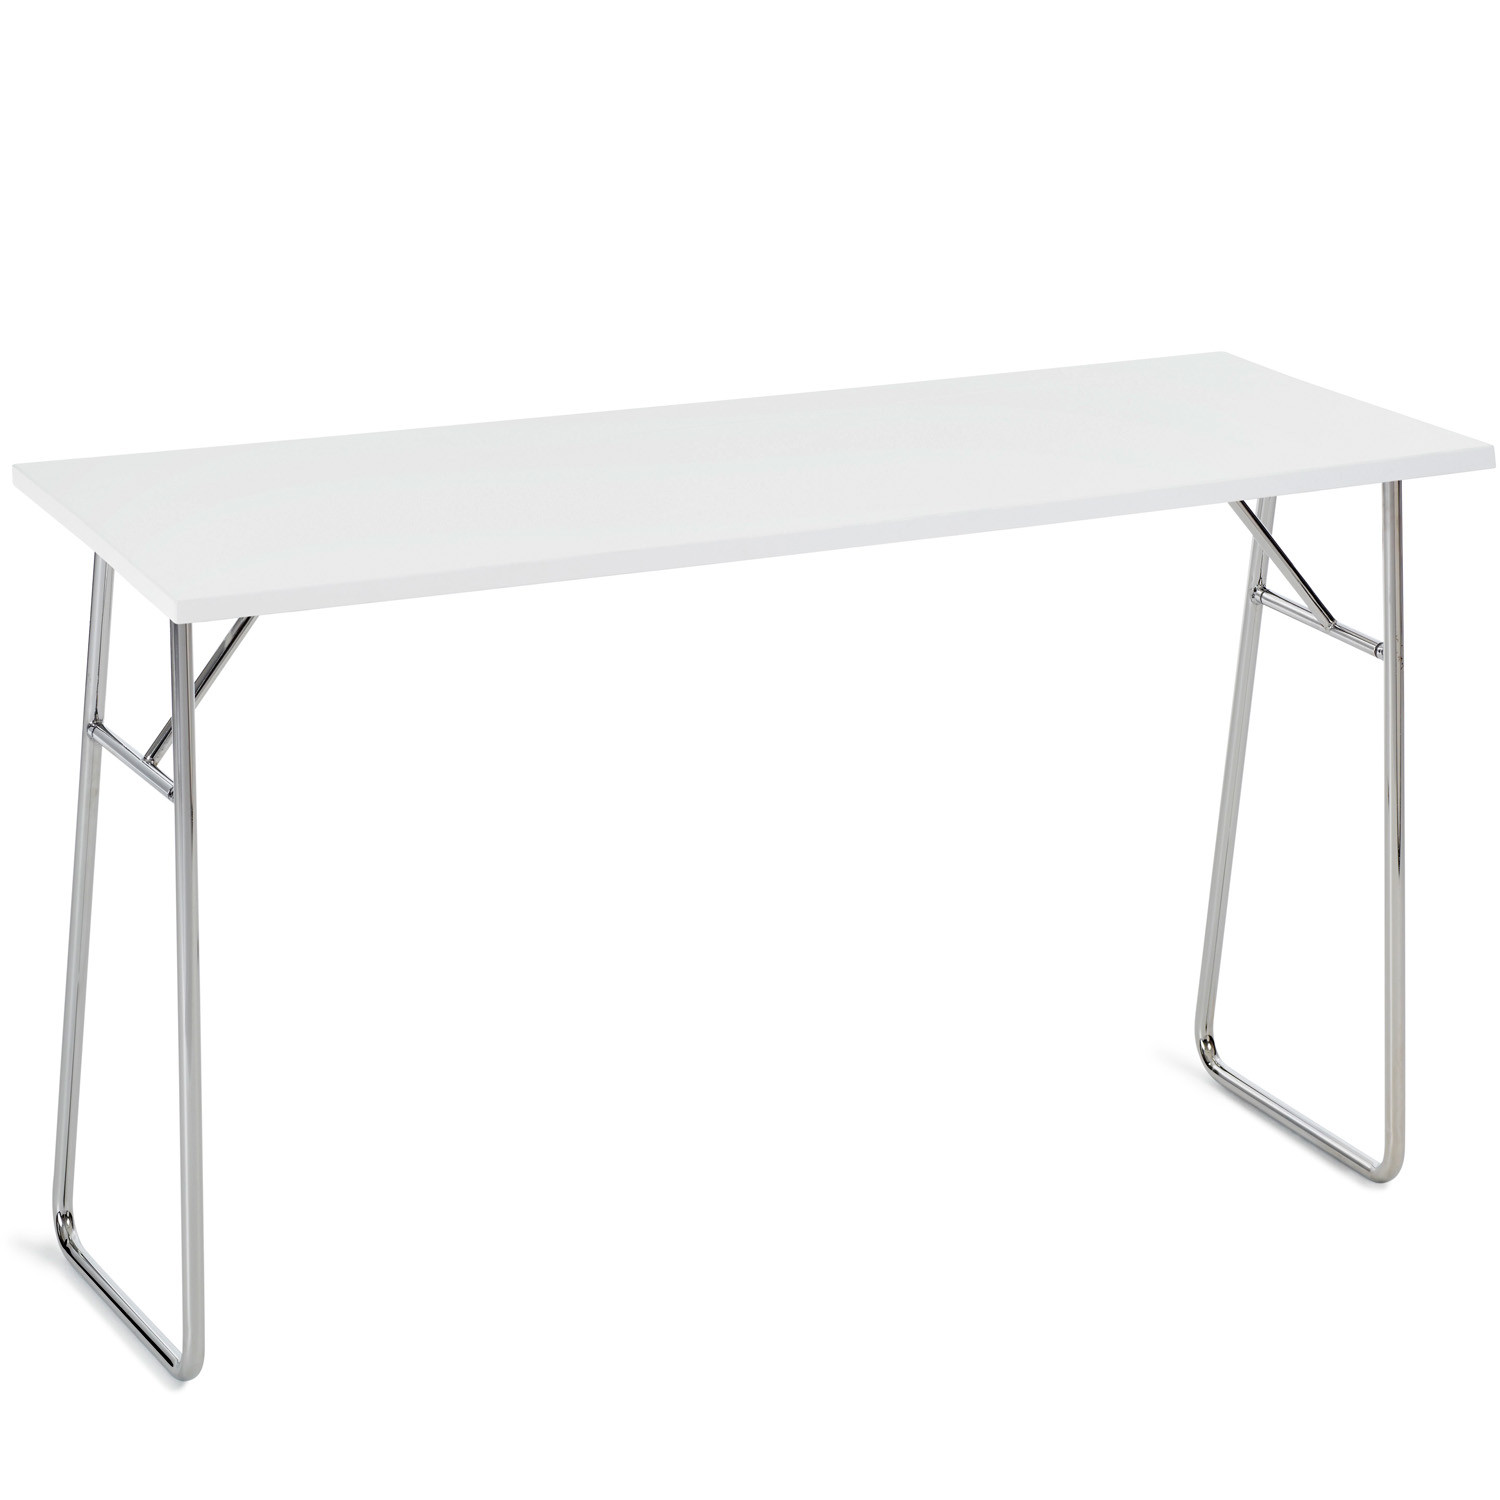 Lite Table by Offecct